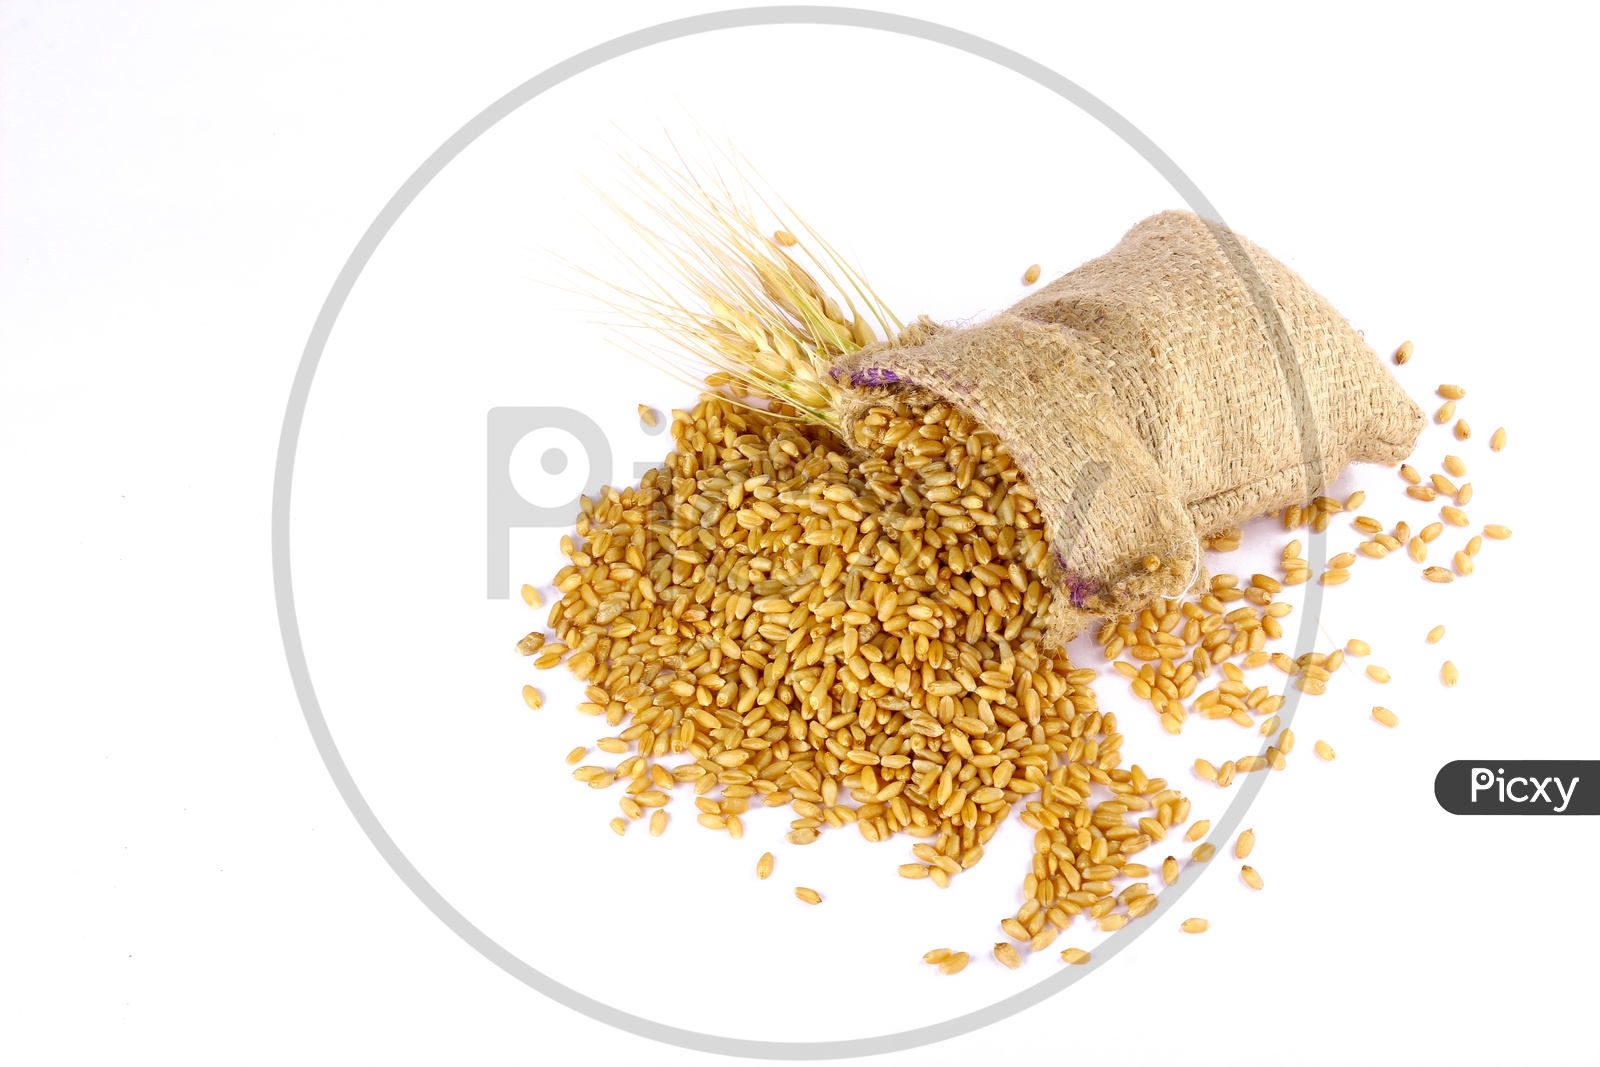 Raw Triticum in Sackbag with a white Background / Wheat Grains in Sackbags / Wheat Grains Flowing Out of Sackbag